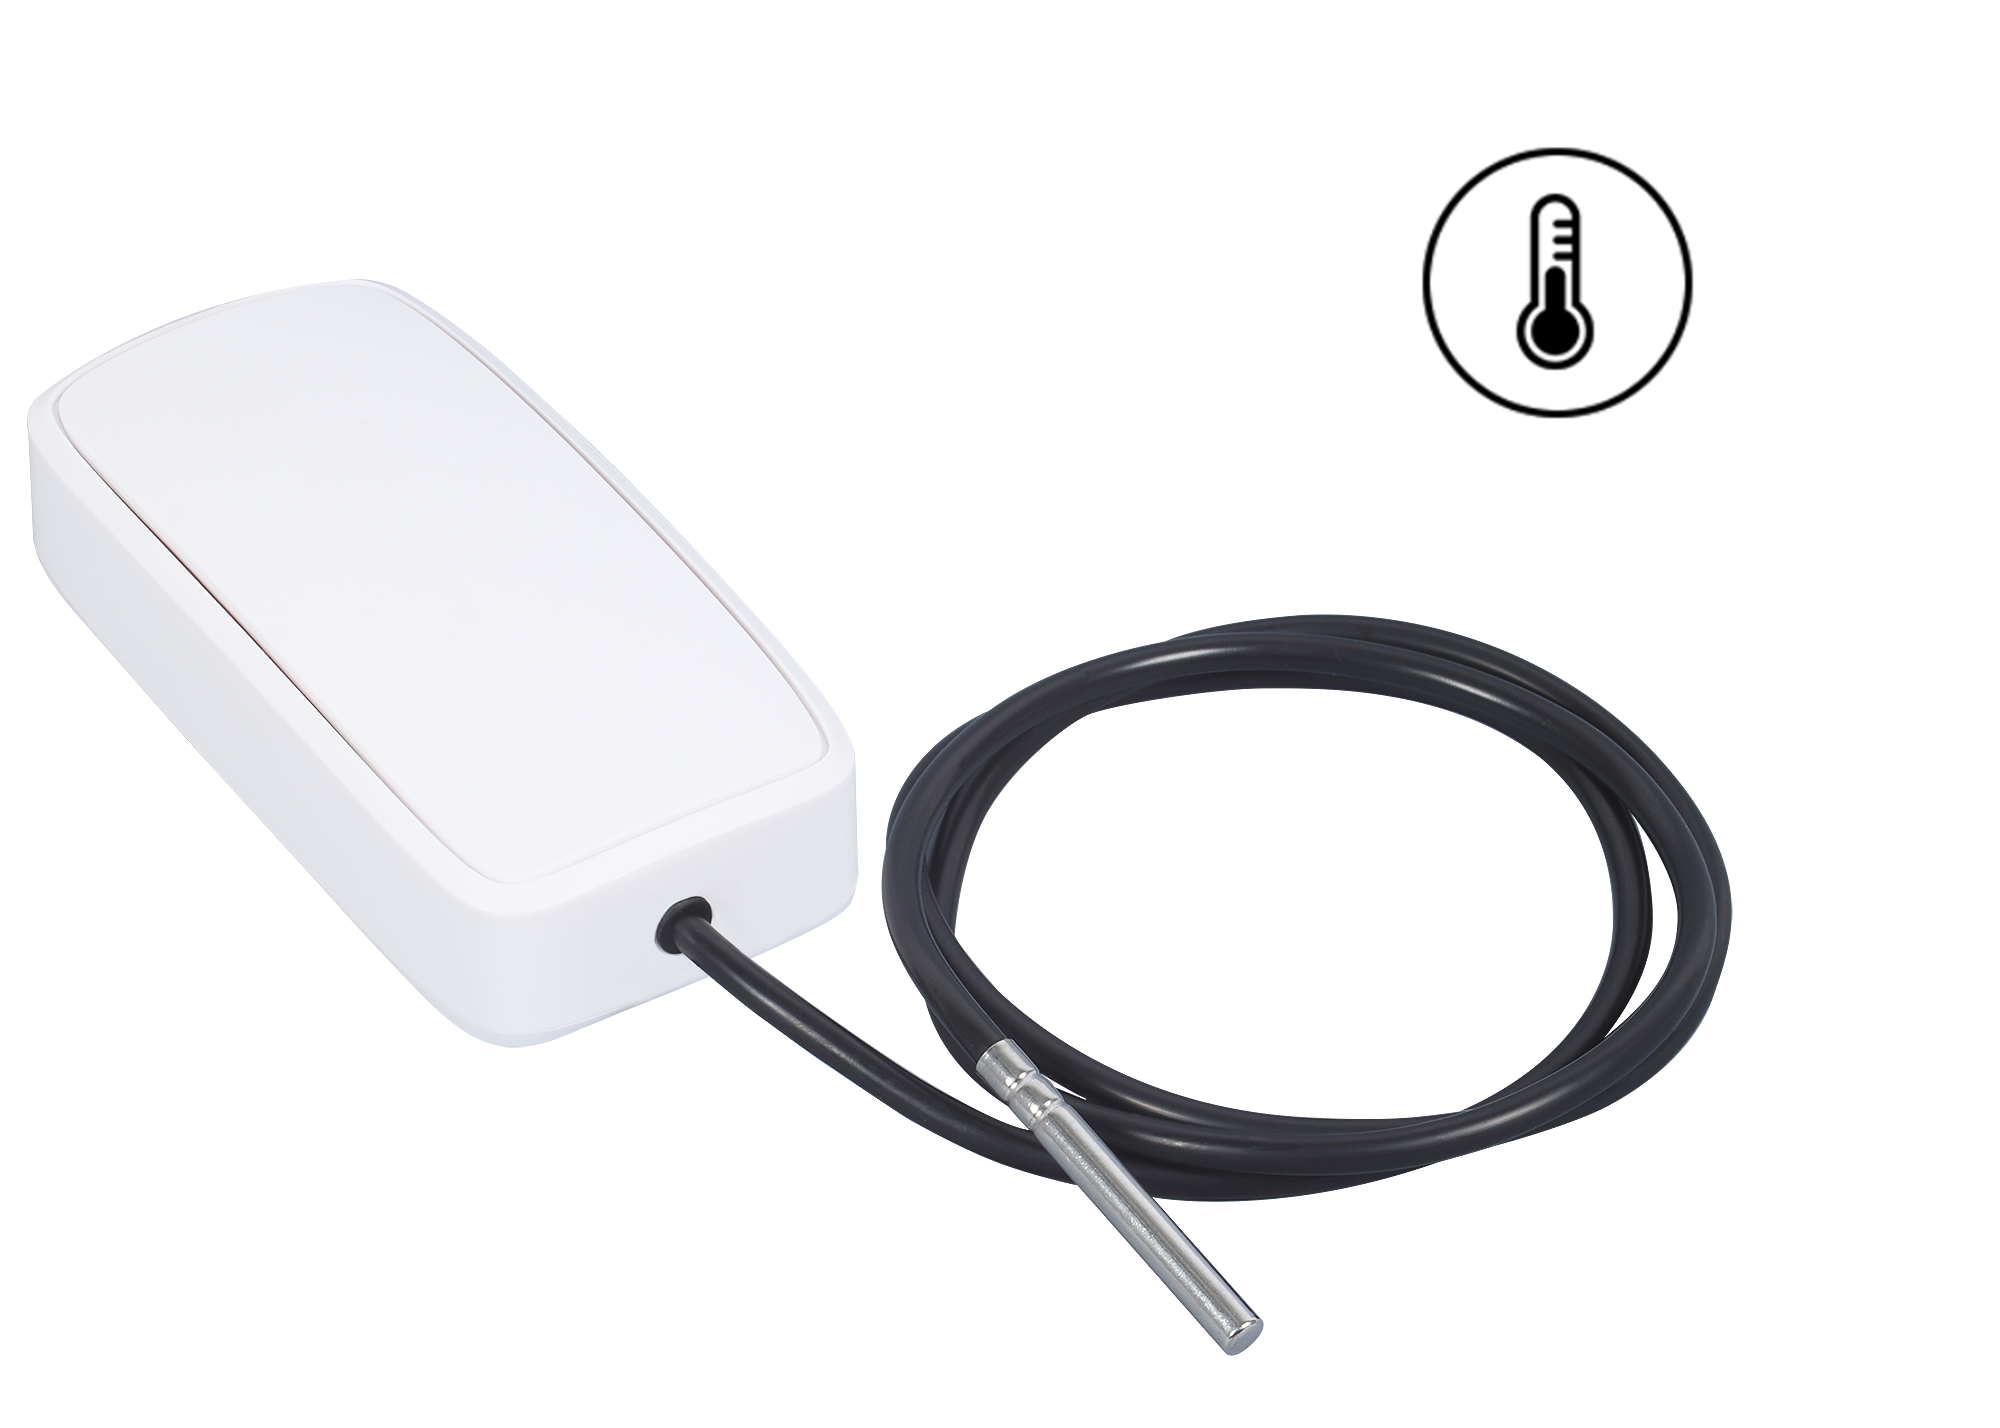 https://getefento.com/wp-content/uploads/2021/08/efento-nb-iot-logger-with-temperature-probe.png